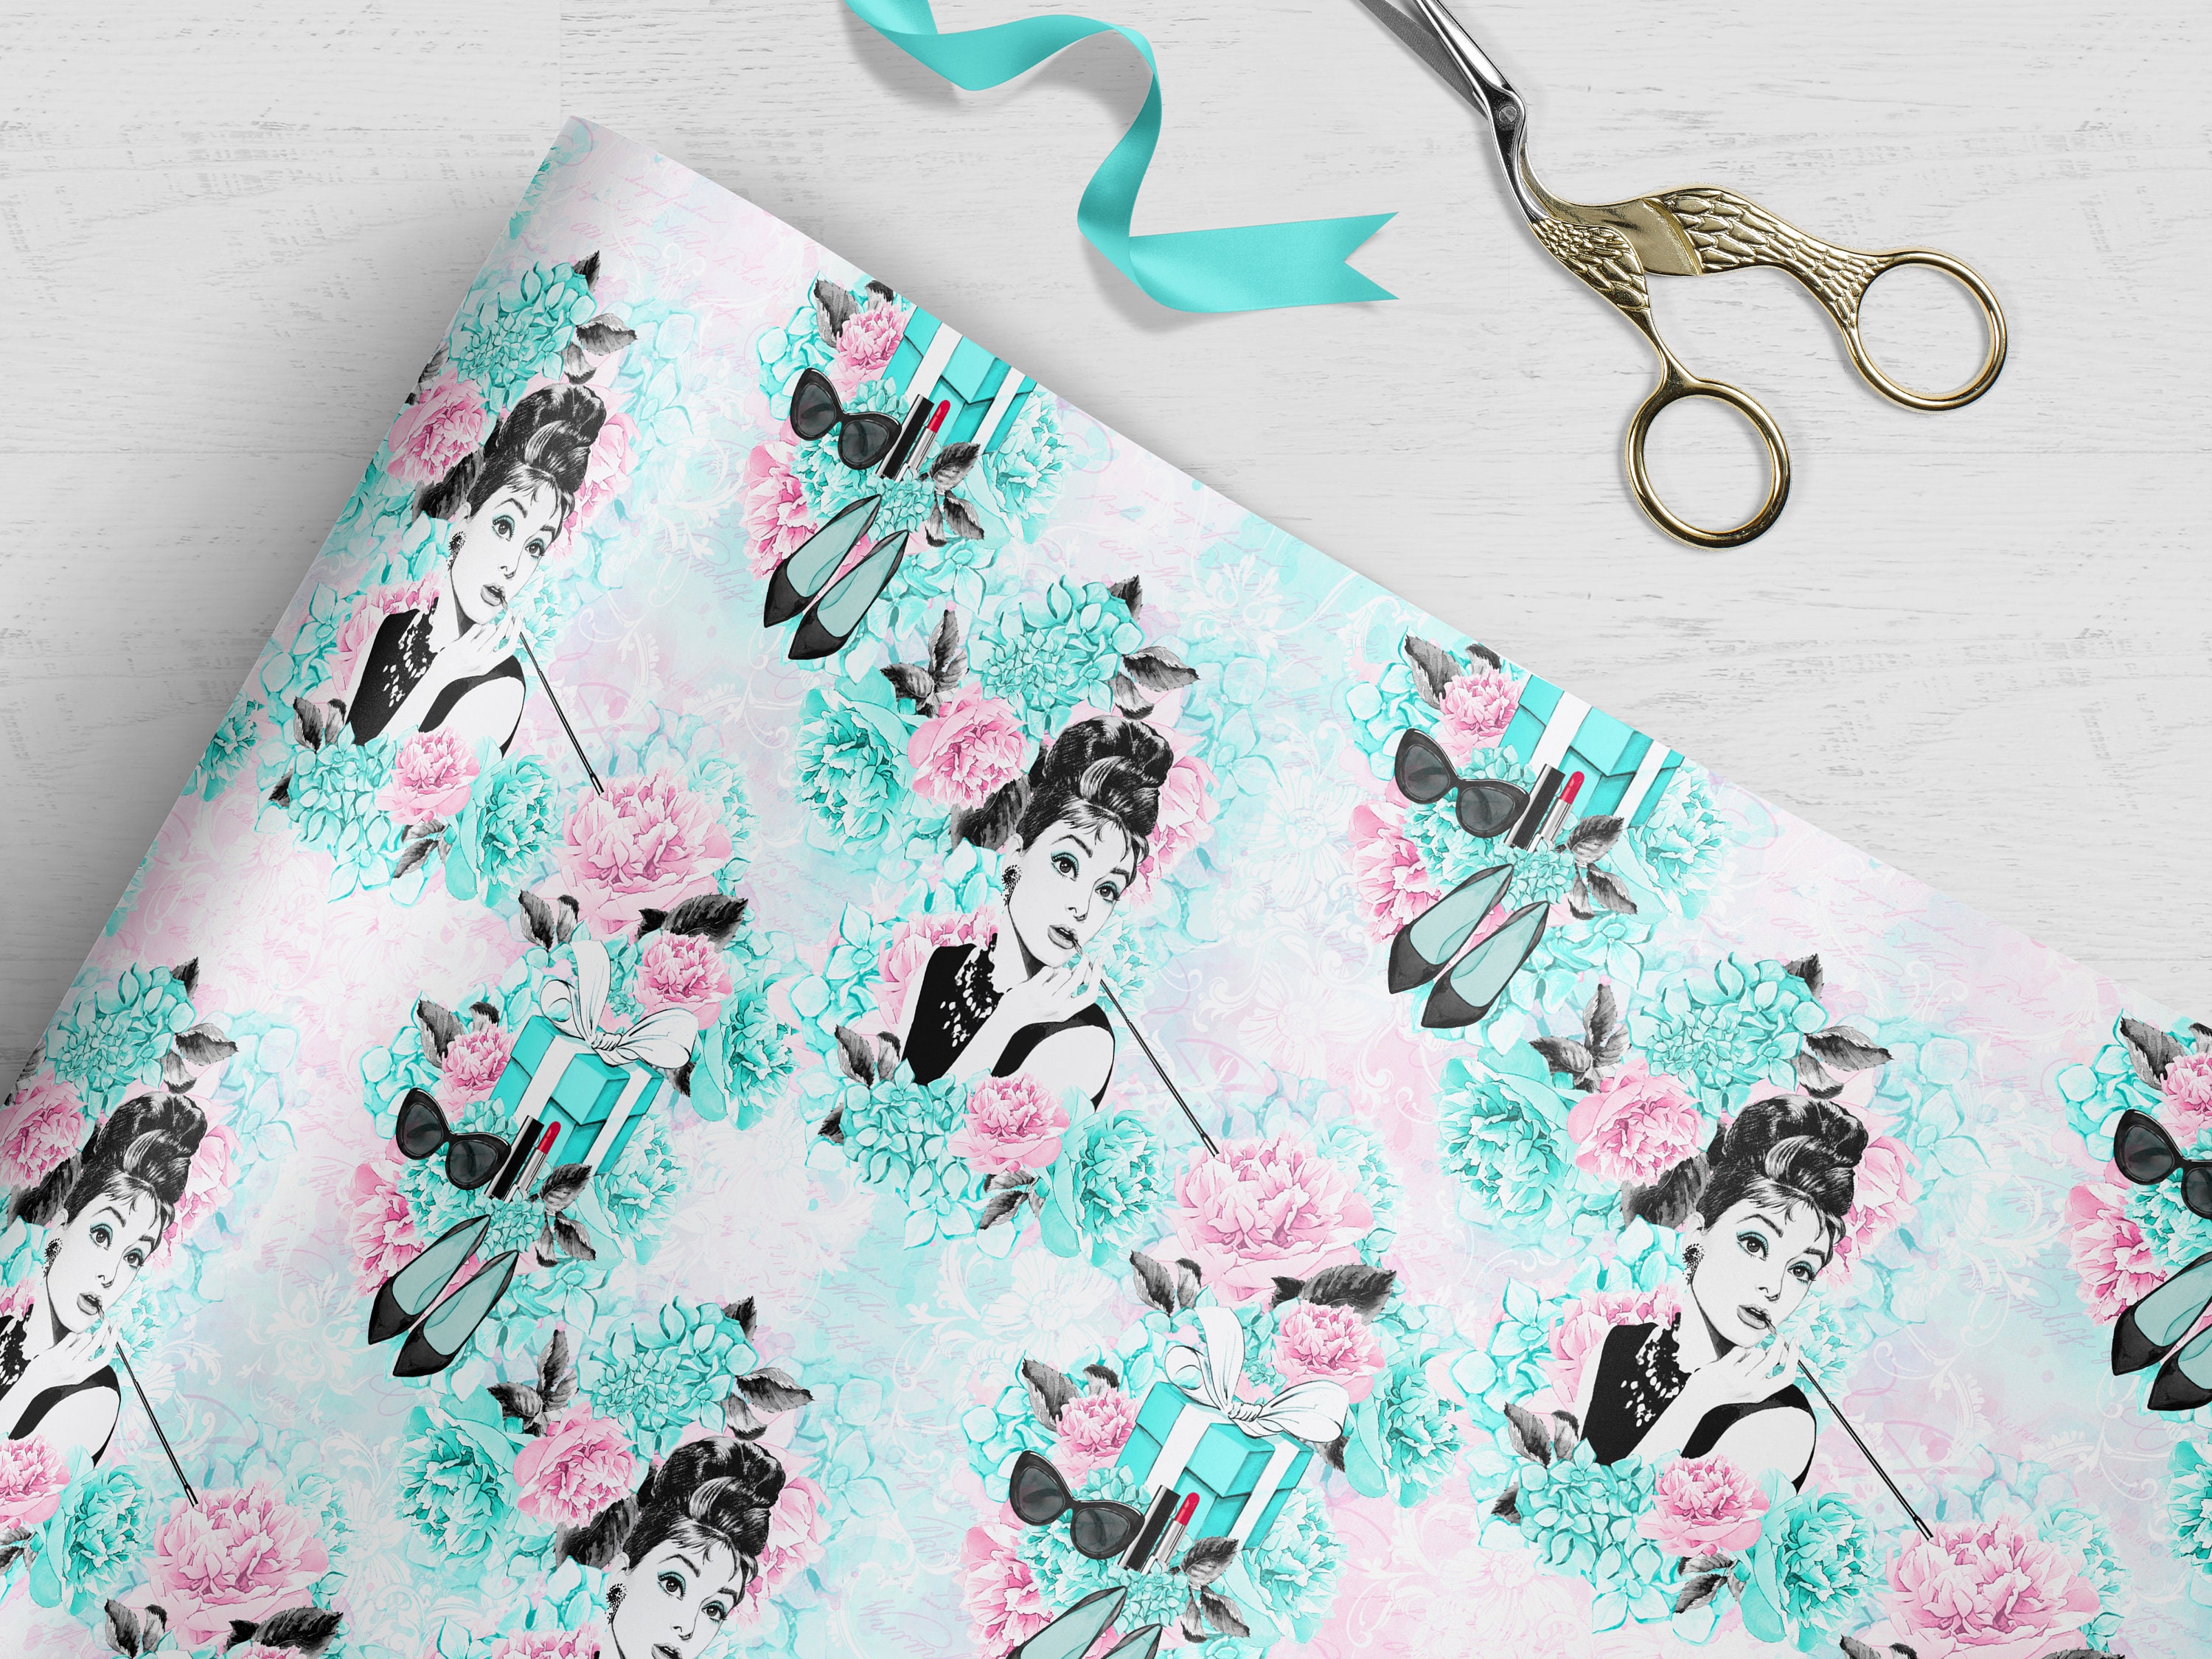 Audrey Hepburn Inspired Wrapping Paper, Wrapping Paper, Wrapping